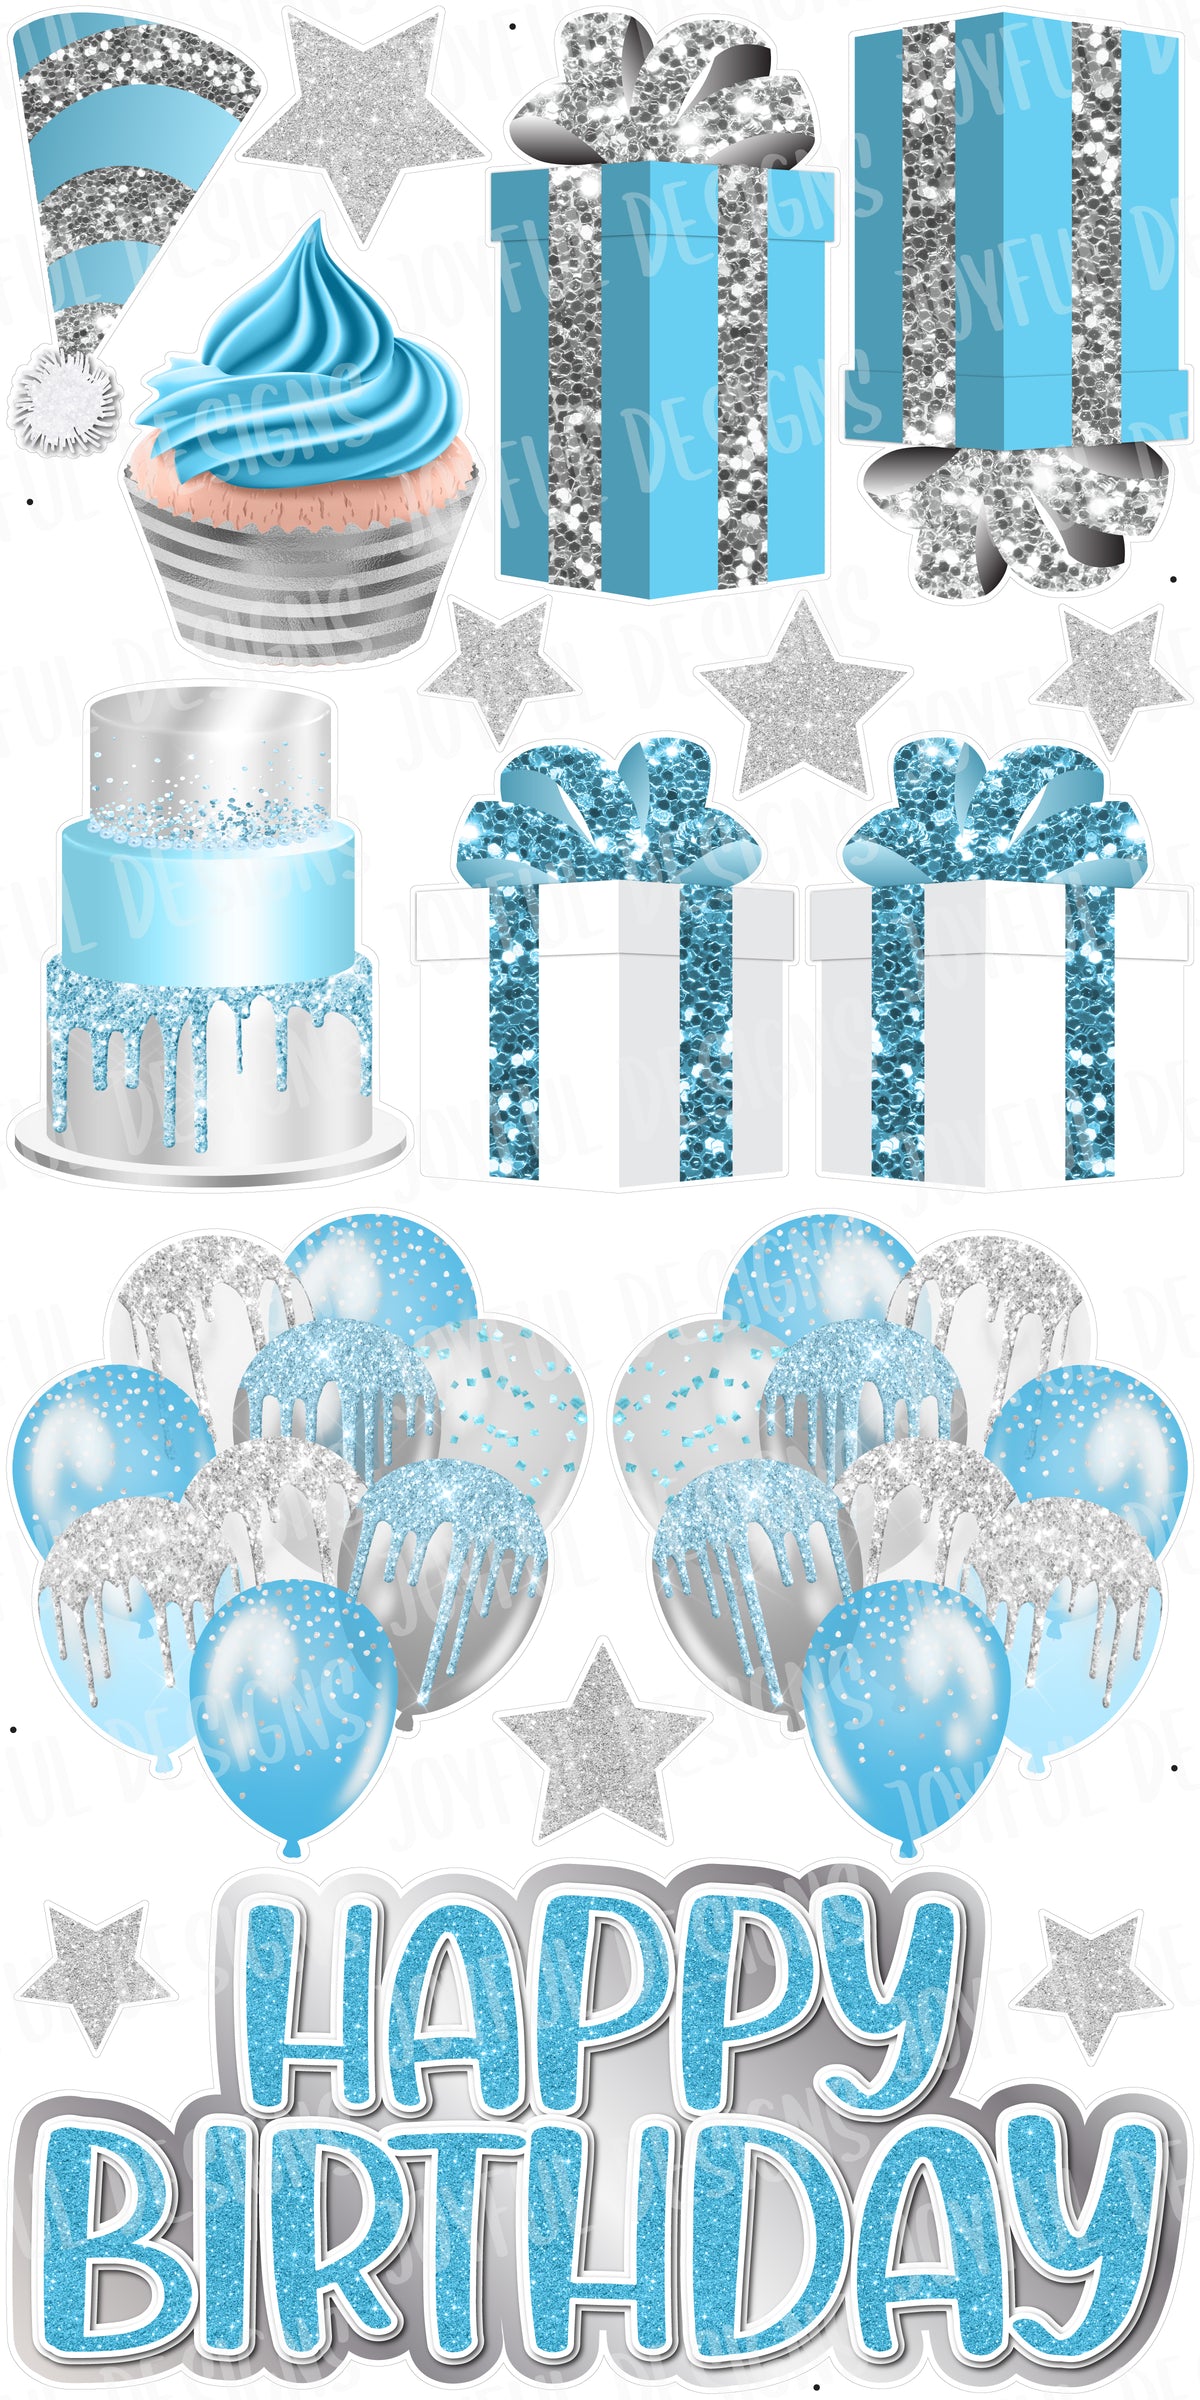 Light Blue and Silver "One and Done" Birthday Flair and Centerpiece Set